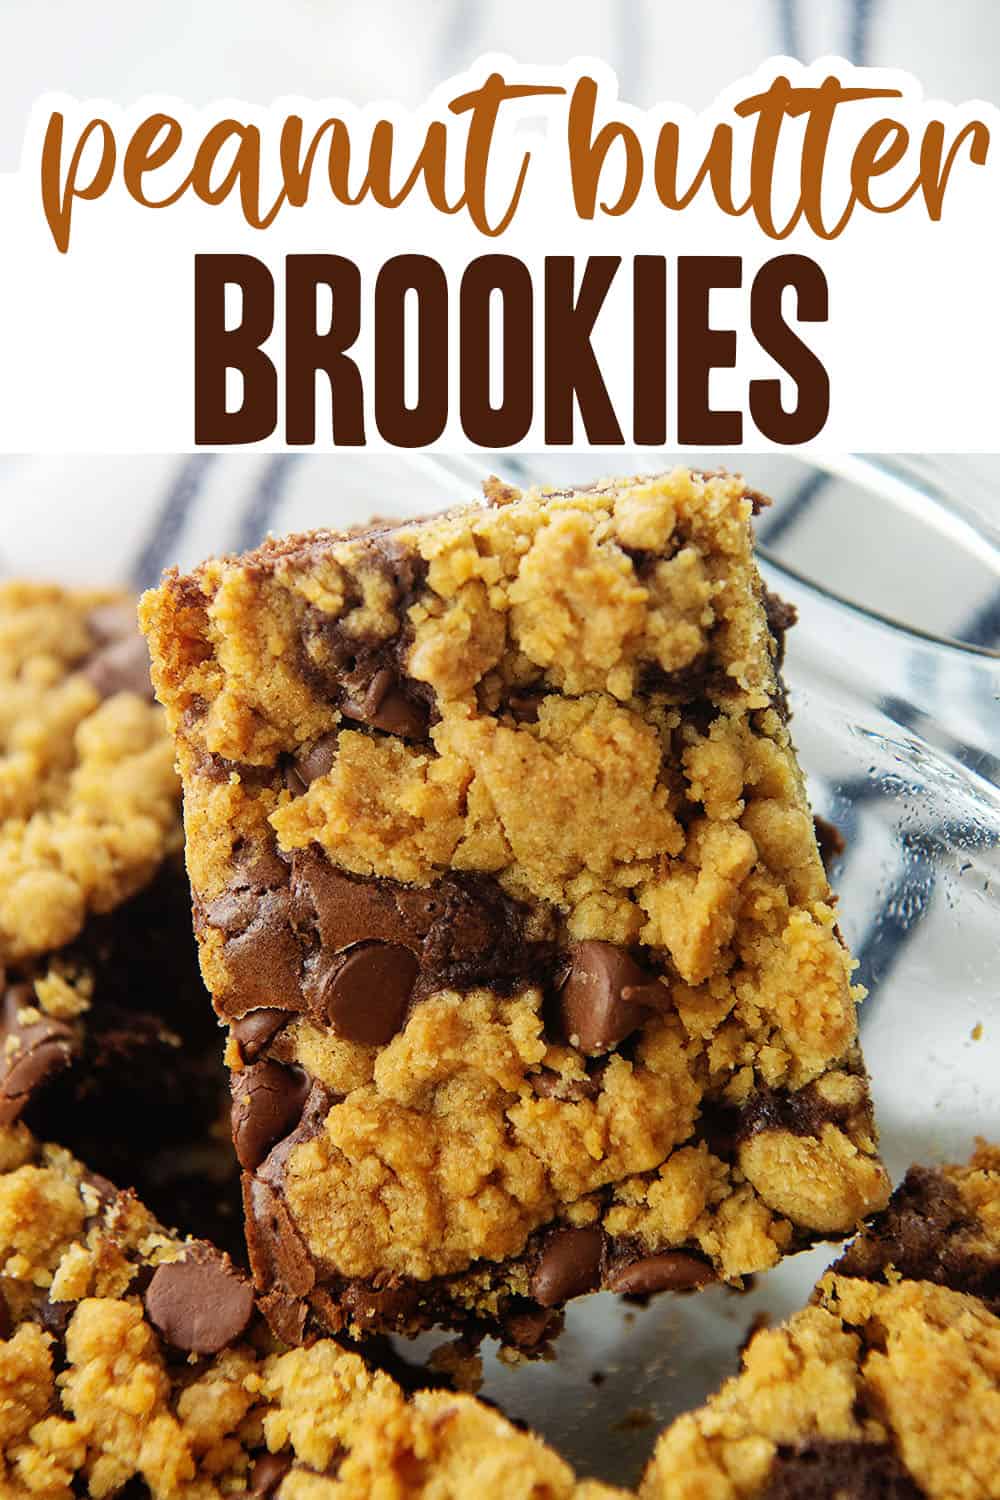 peanut butter broookies with text for Pinterest.